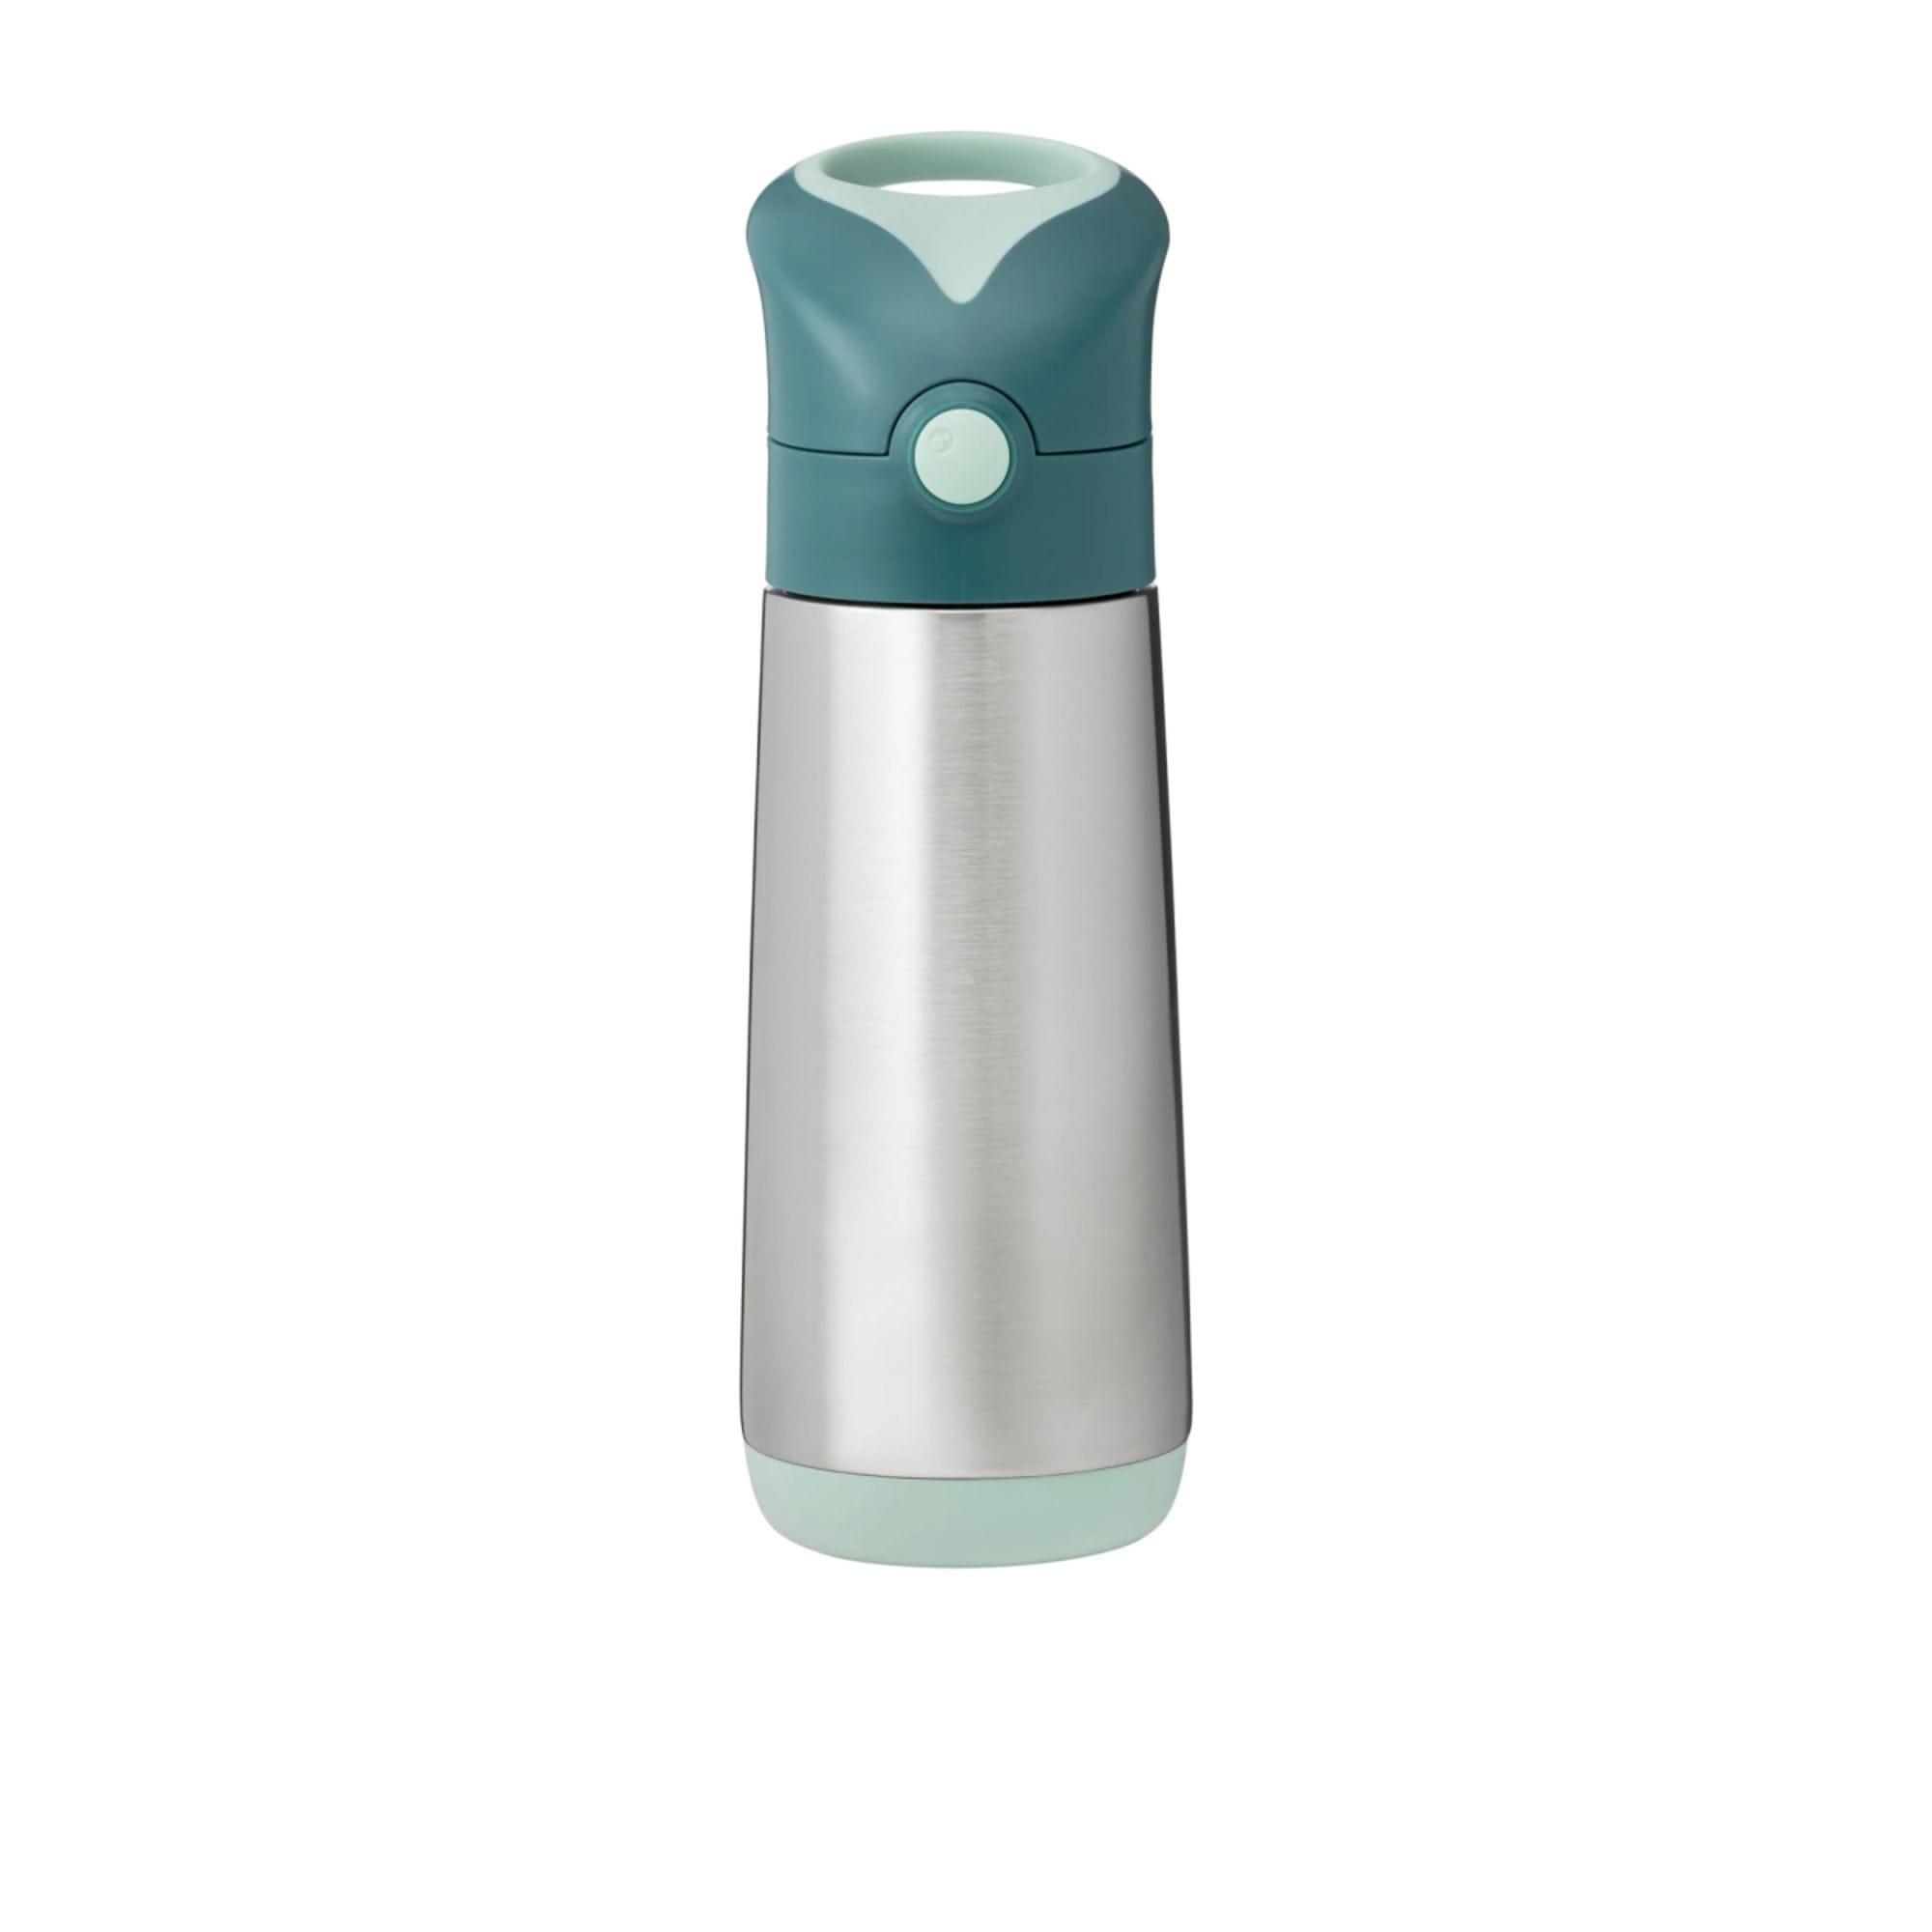 b.box Insulated Drink Bottle 500ml Emerald Forest Image 6